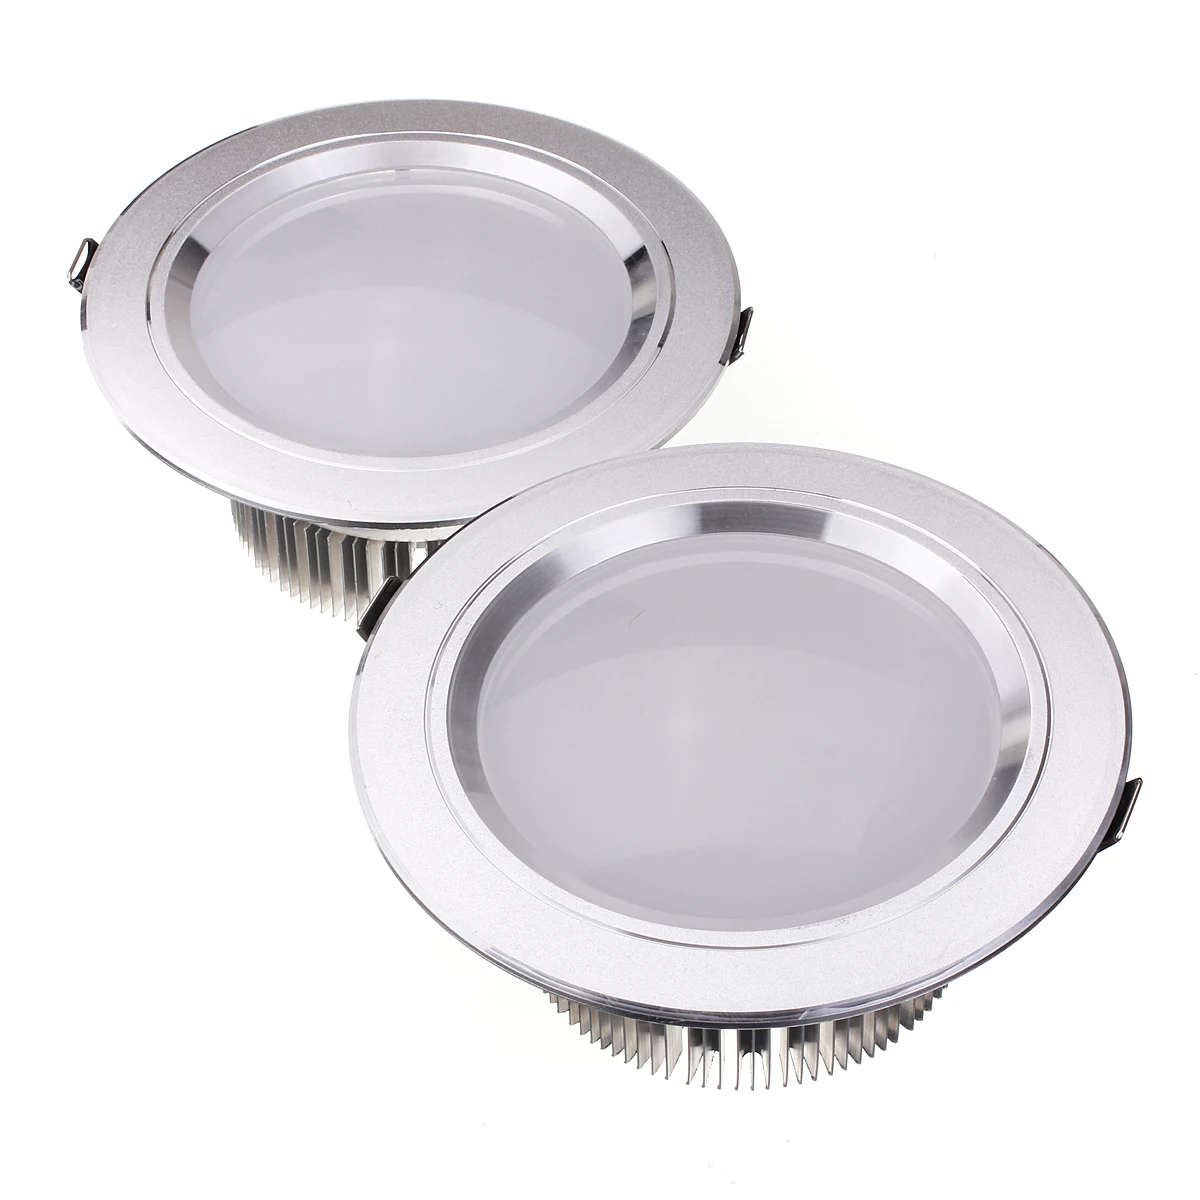 Ultra Bright 12W Led Ceiling Recessed Downlight Round/Square Panel light 1150-1250LM Led Panel Bulb Lamp Light